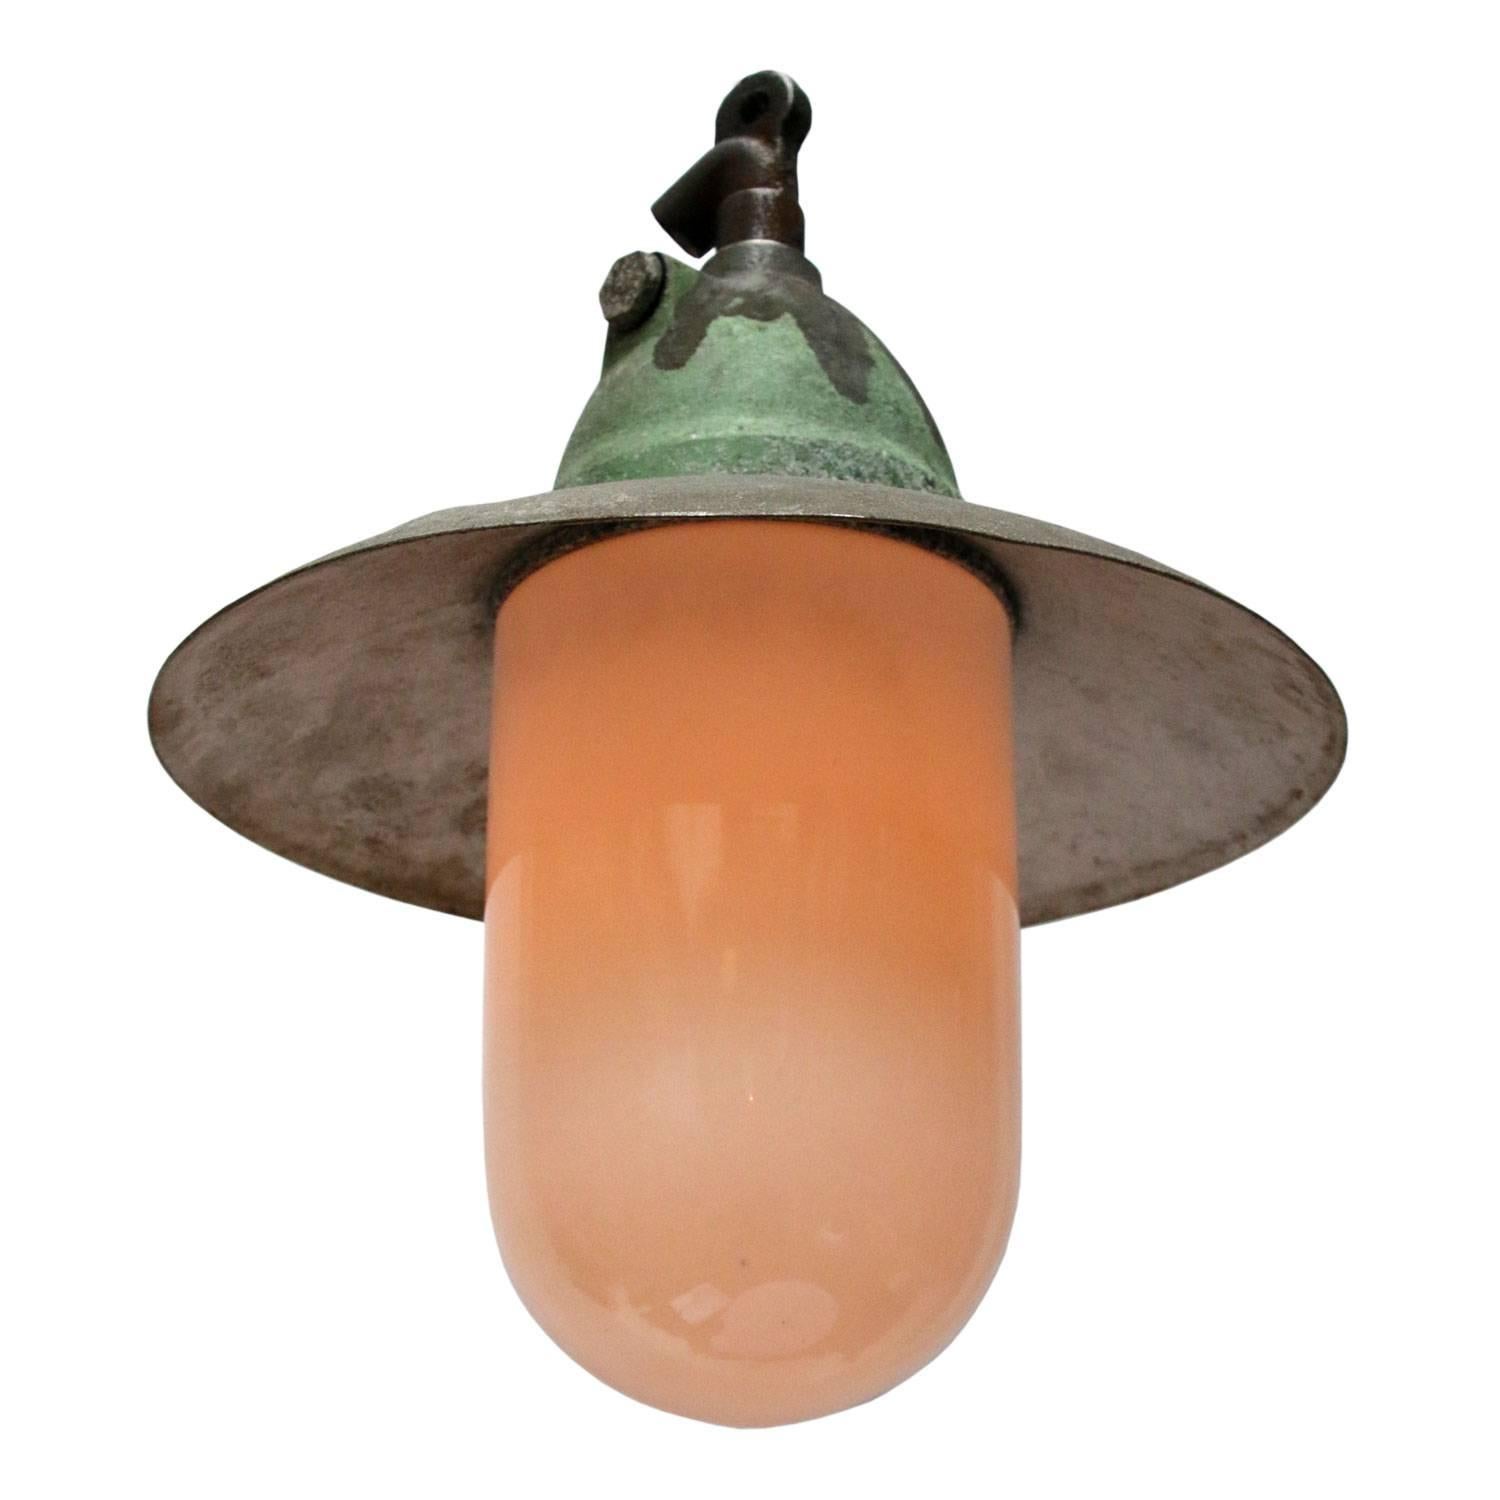 Industrial hanging lamp. Grey Green cast aluminum.
White Opaline glass.

Weight: 3.6 kg / 7.9 lb

All lamps have been made suitable by international standards for incandescent light bulbs, energy-efficient and LED bulbs. E26/E27 bulb holders and new